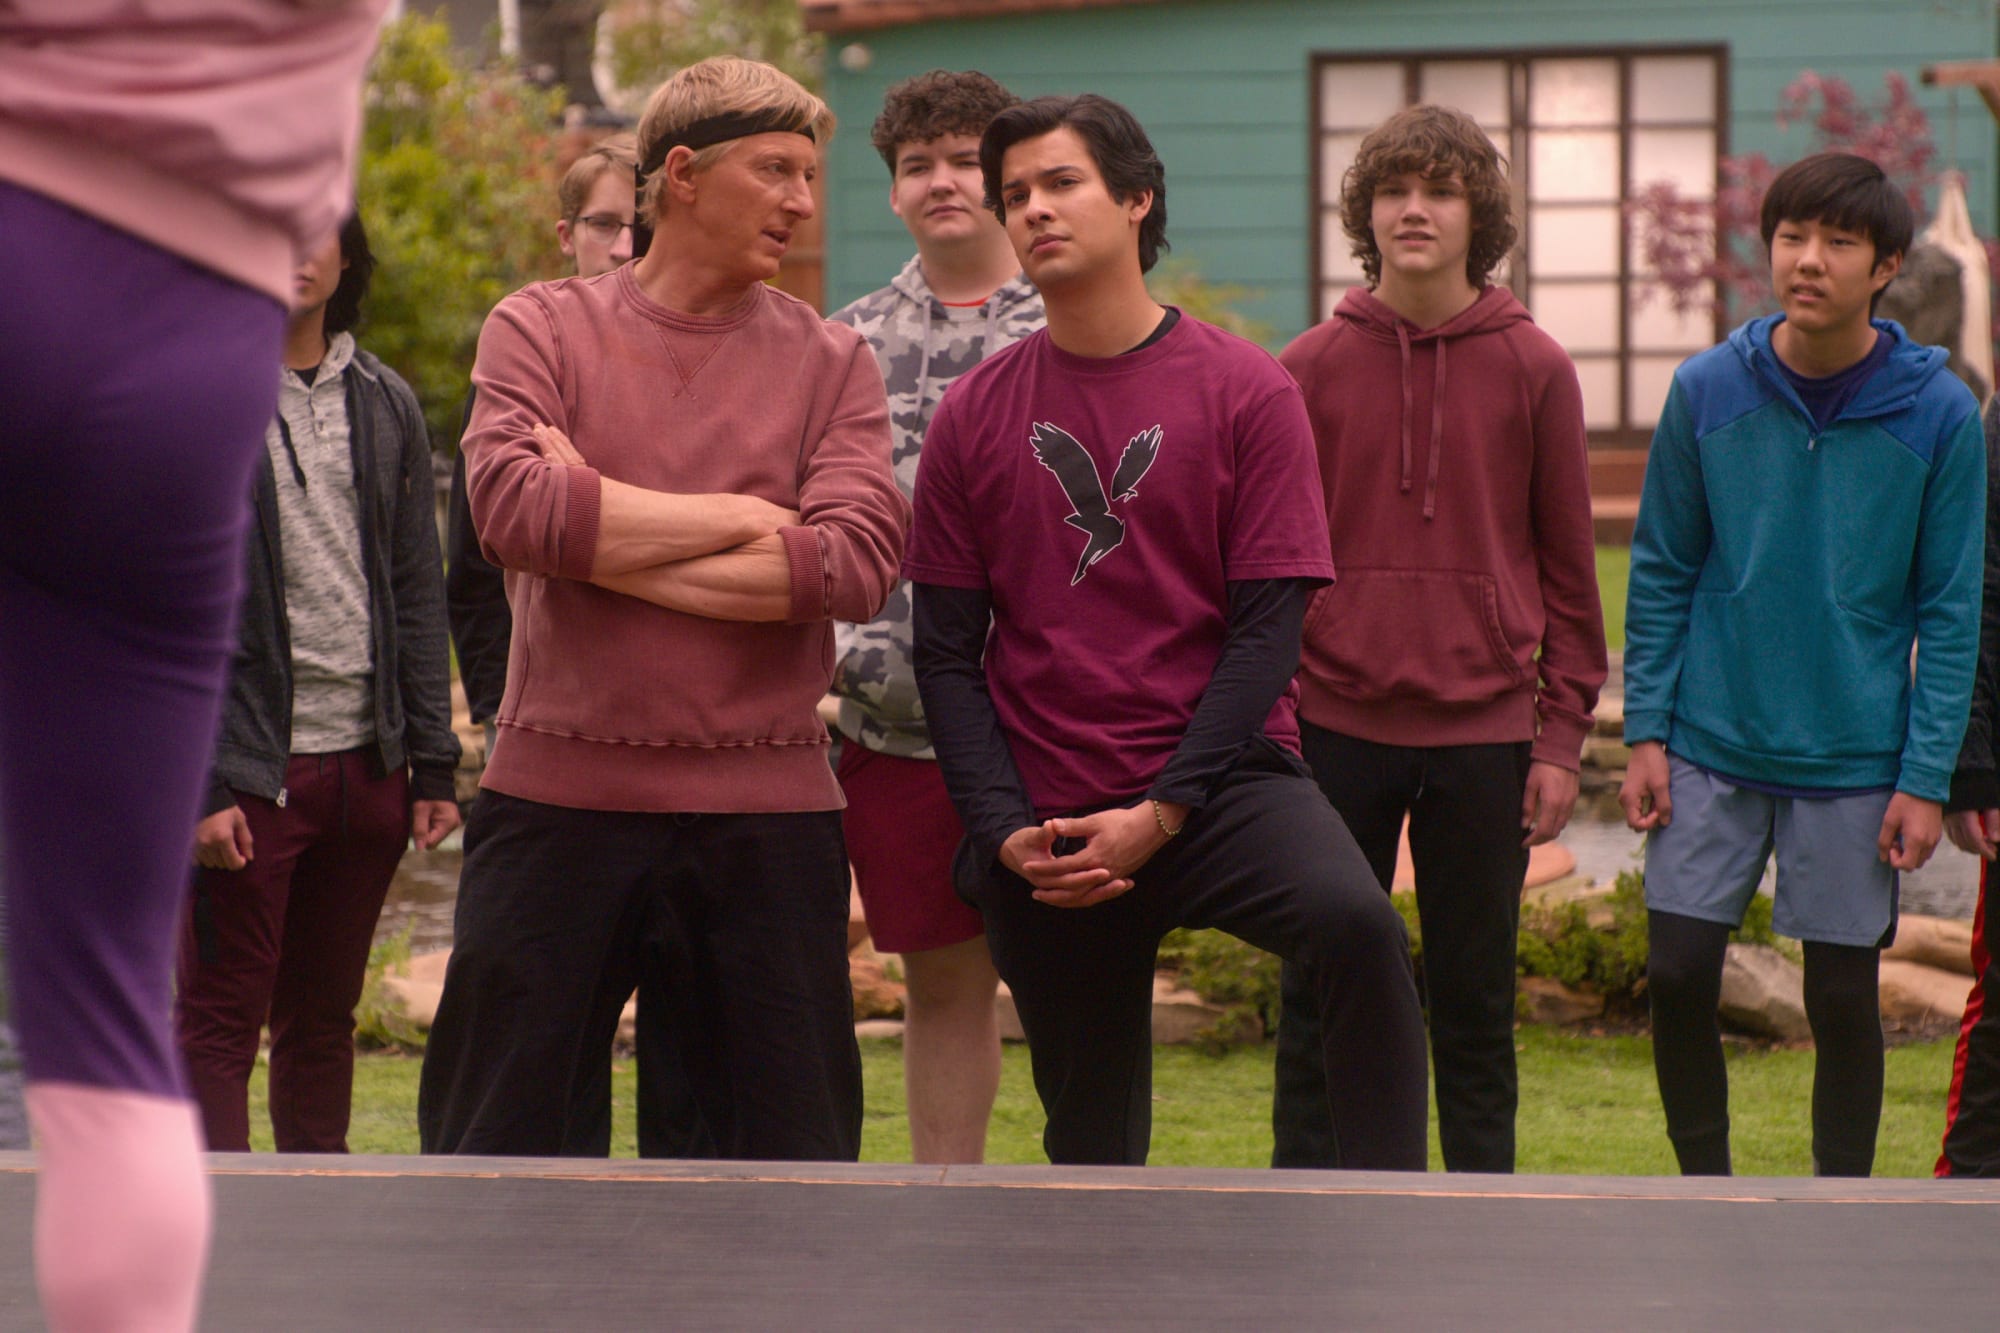 In Cobra Kai All Valley Tournament Season 4, Miguel vs Robbie. Can Miguel  use the pressure points that Chozen taught Daniel in the All Valley  tournament? Why? - Quora